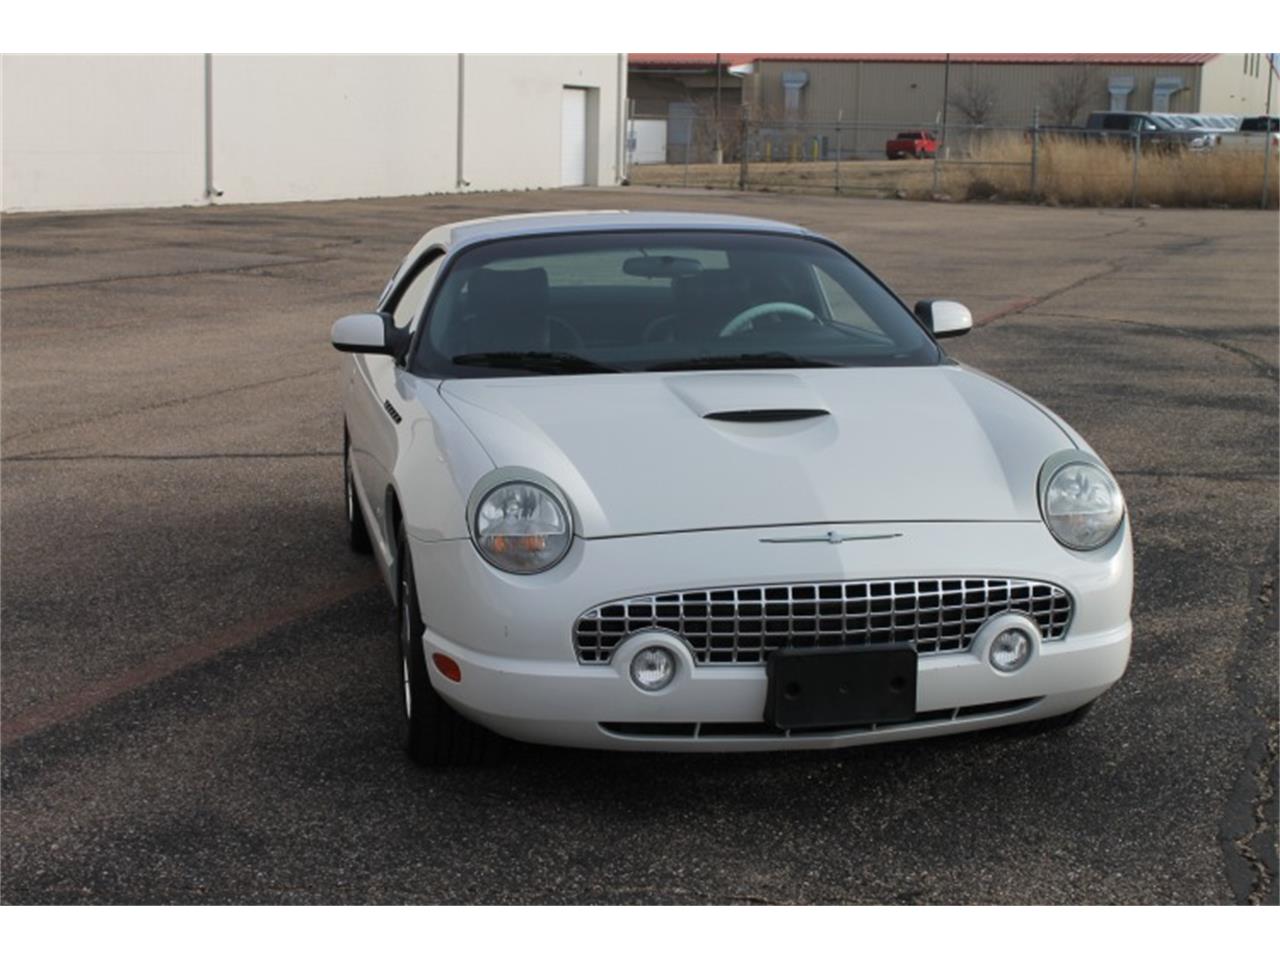 For Sale at Auction: 2003 Ford Thunderbird for sale in Peoria, AZ